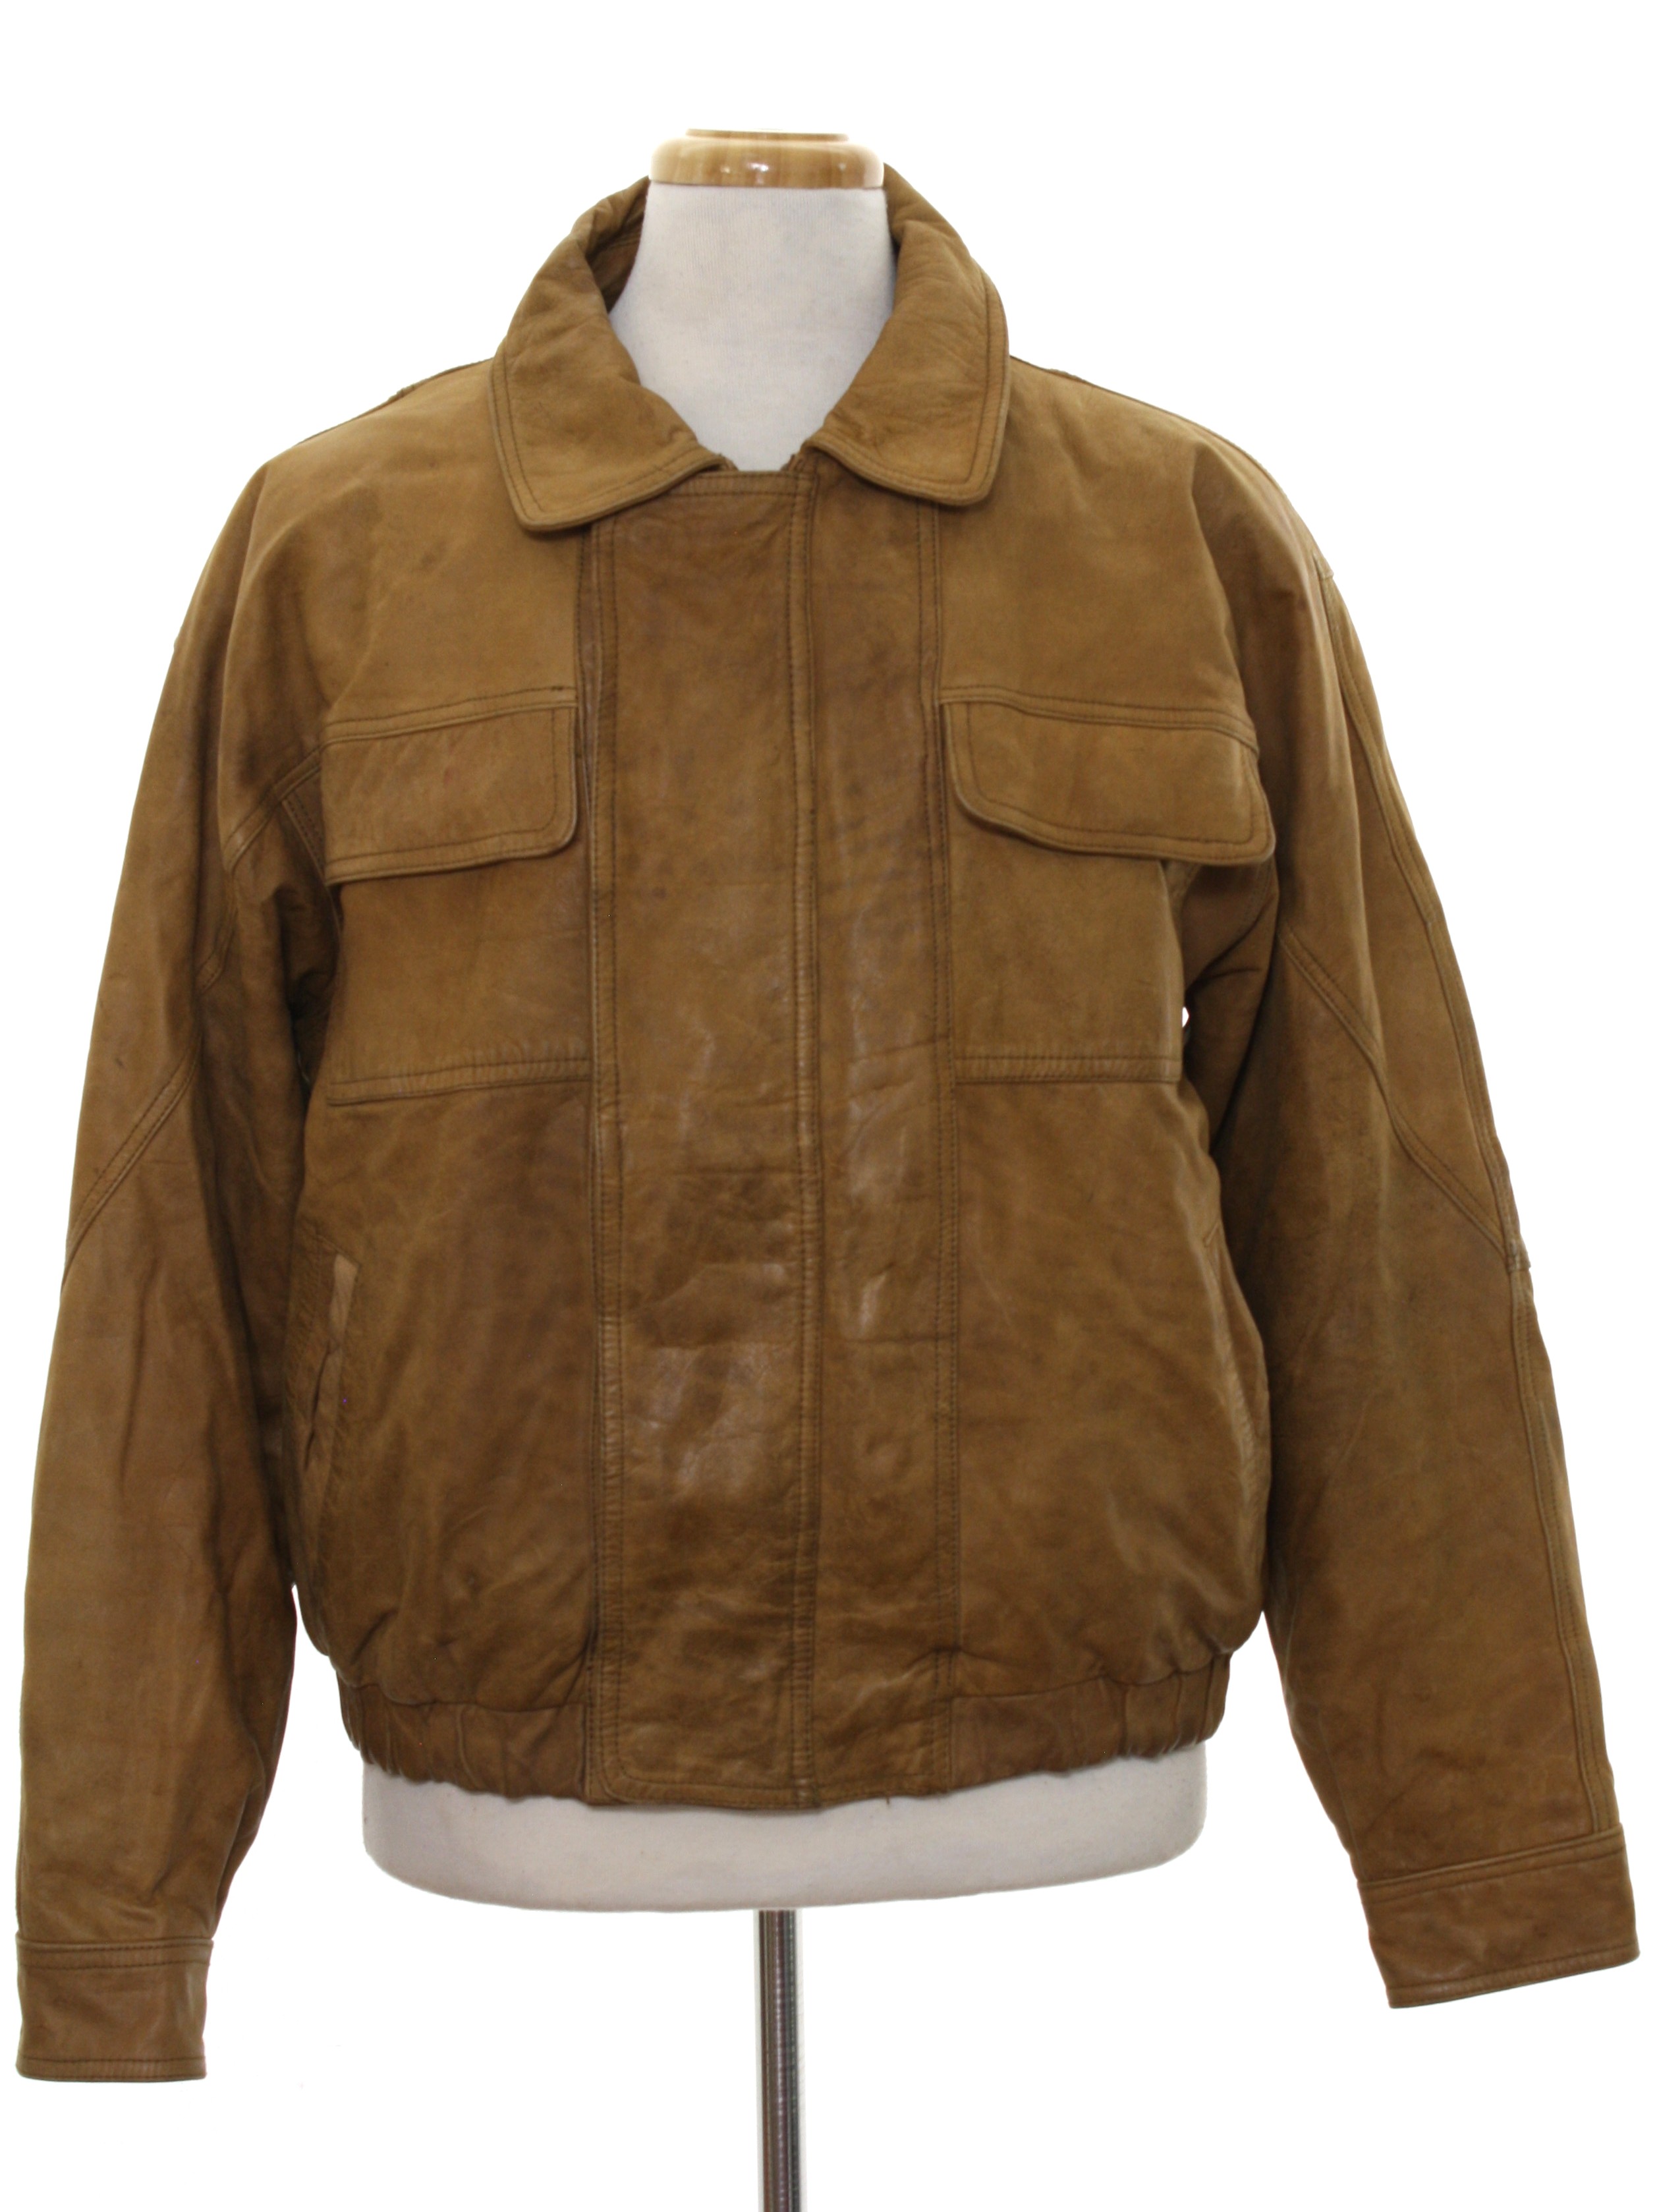 Retro Eighties Leather Jacket: Late 80s or Early 90s -New Zealand ...